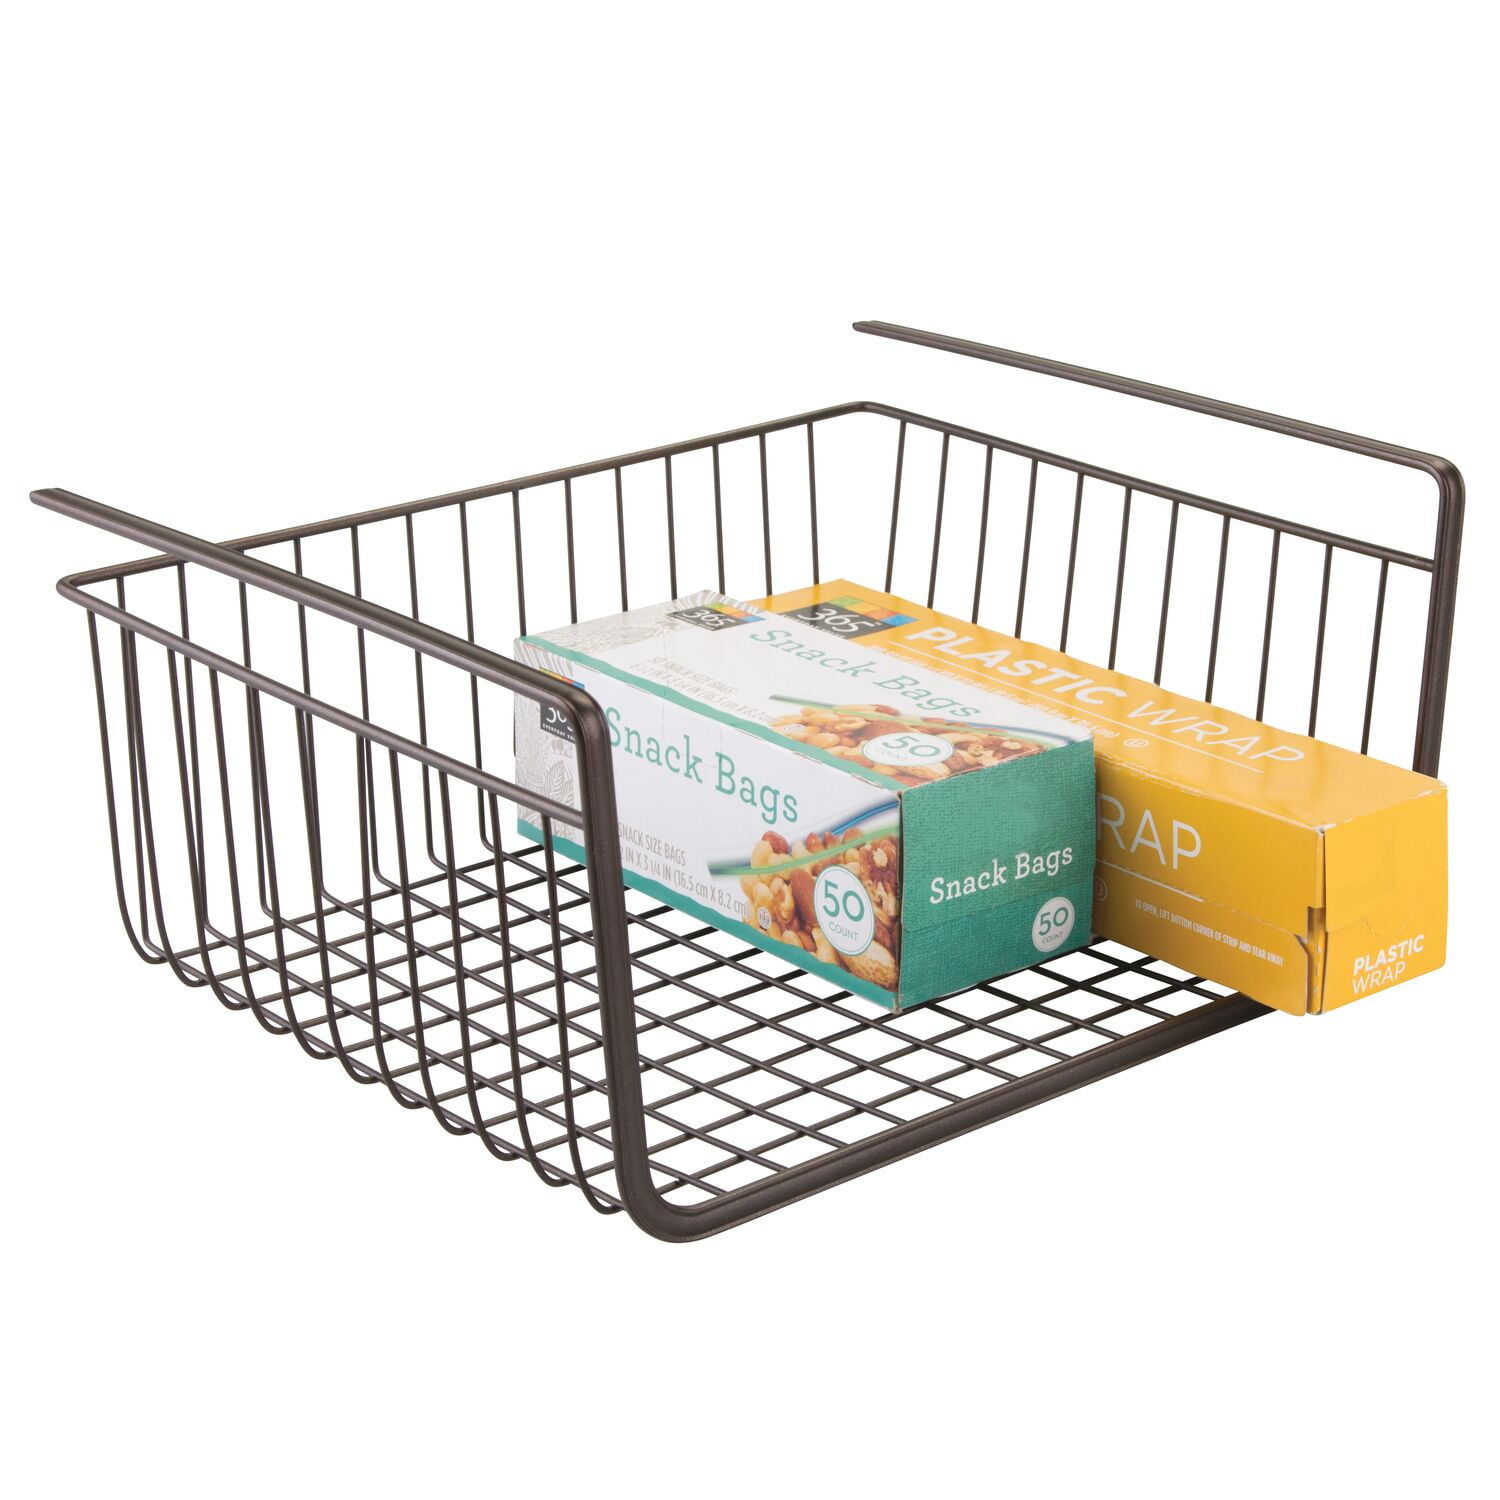 Tonchean 2 Tier Stainless Steel Pull Out Kitchen Cabinet Drawer Basket